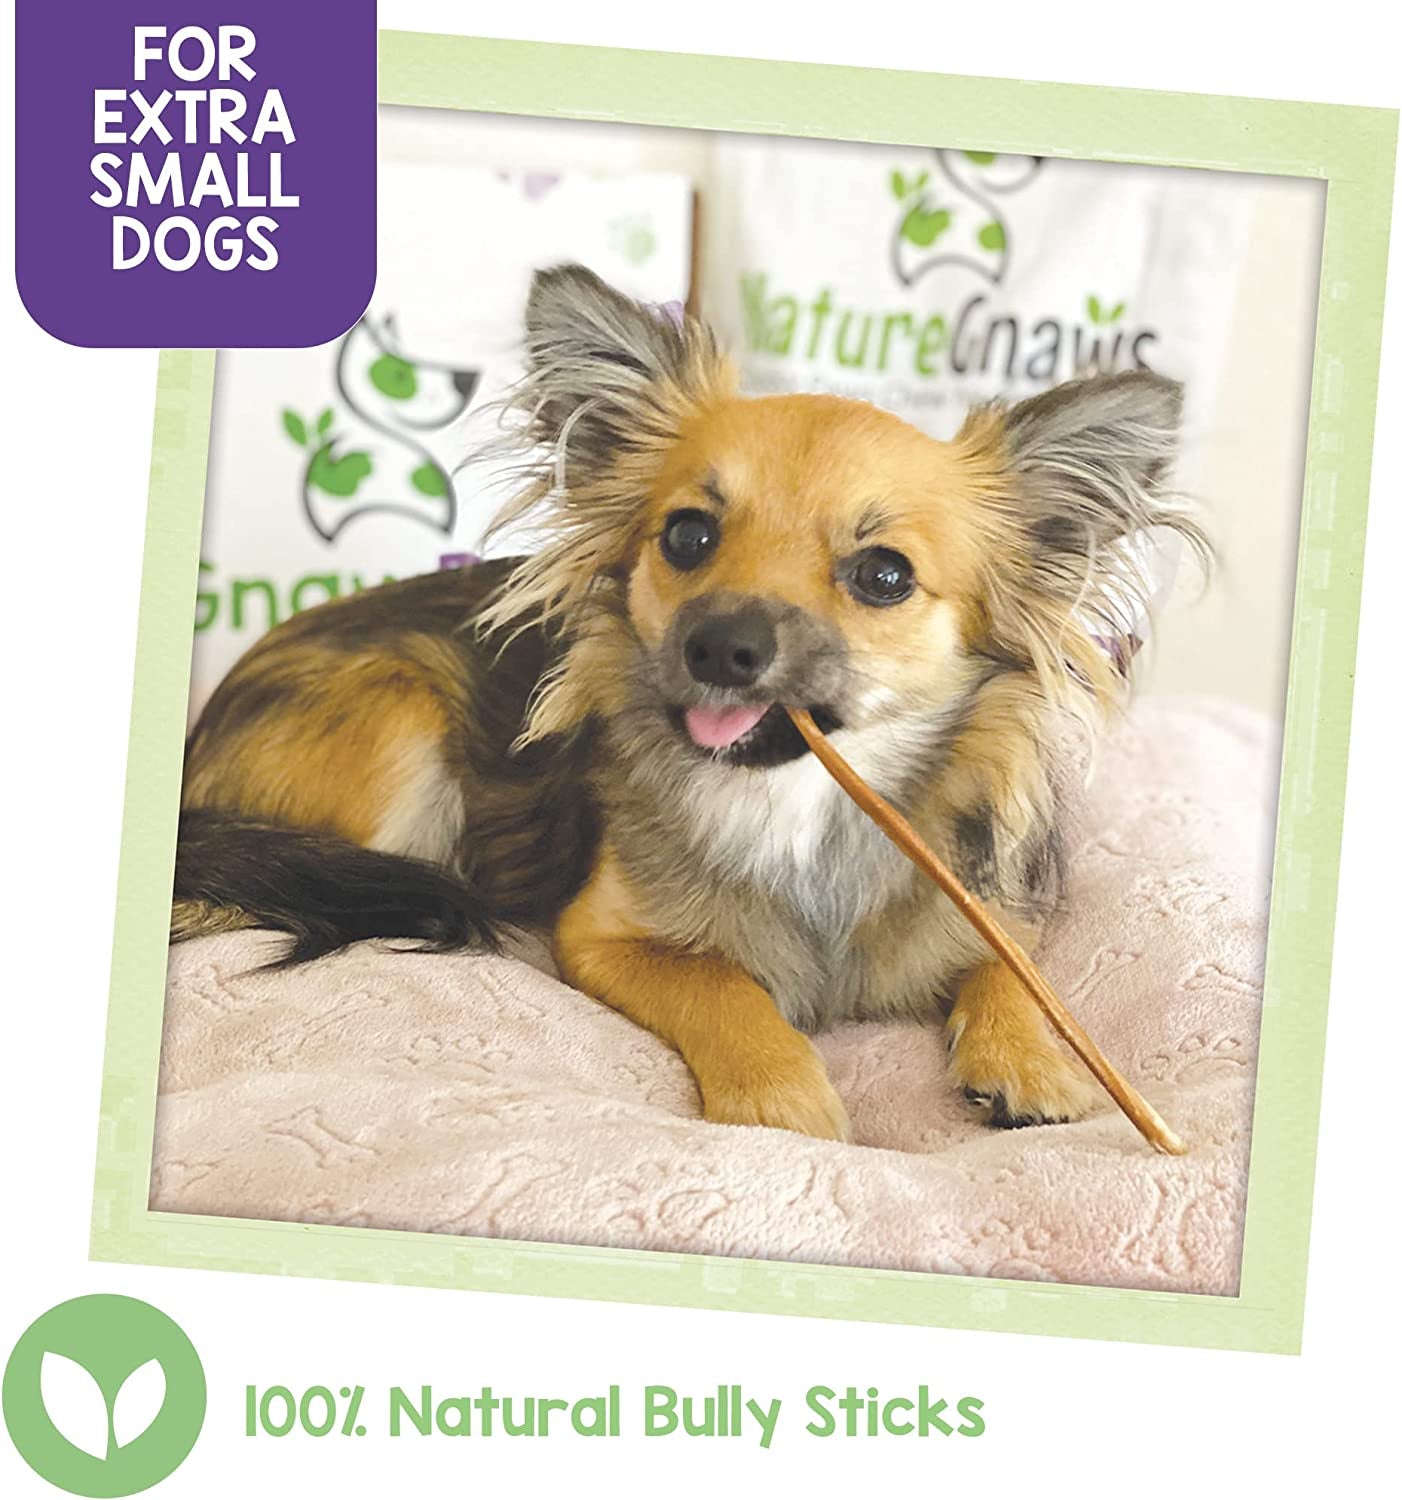 "Irresistible Skinny Bully Sticks for Small Dogs - 40 Premium Natural Beef Dental Bones - Perfect Thin Chew Treats for Toy Breeds & Puppies - Rawhide Free!"